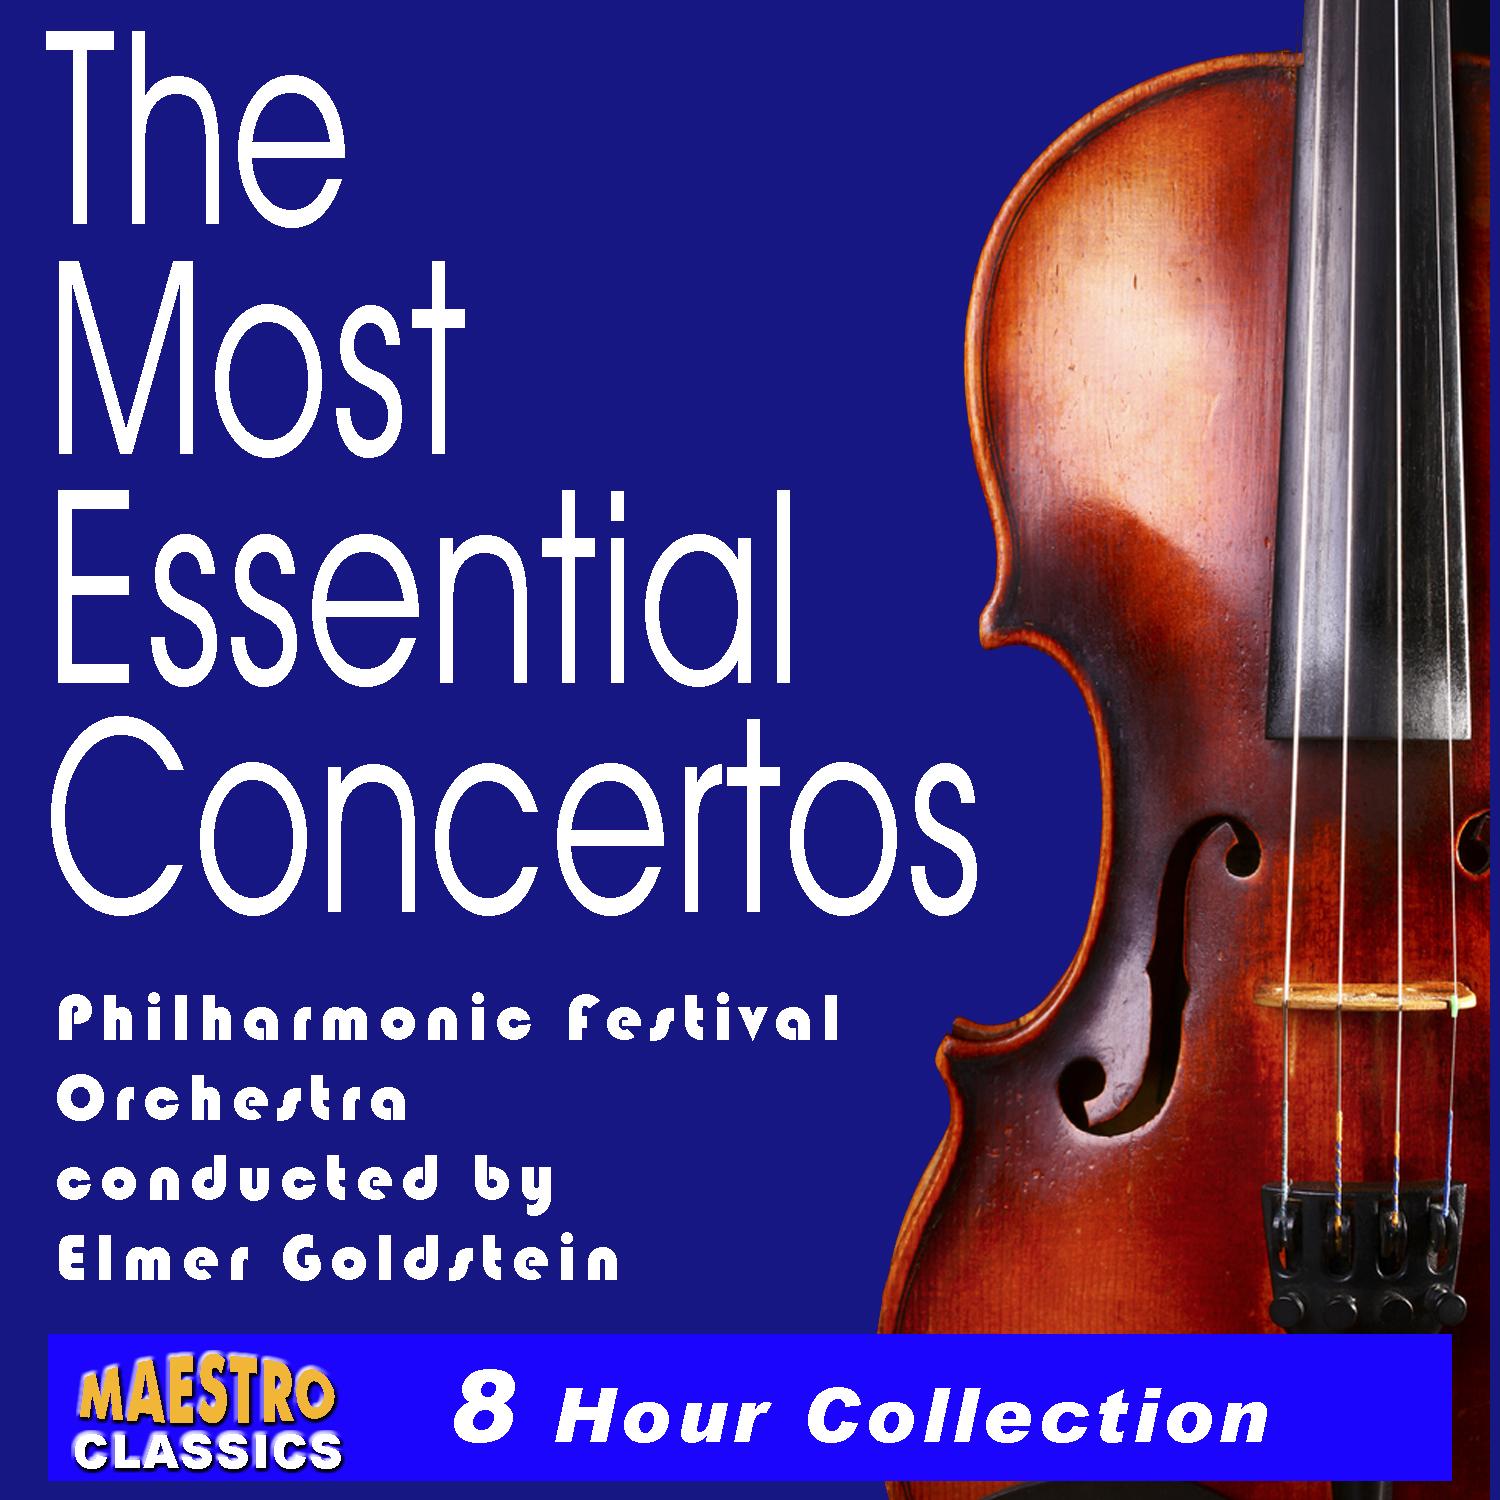 The Most Essential Concertos - 20 of the World's Best (Complete)